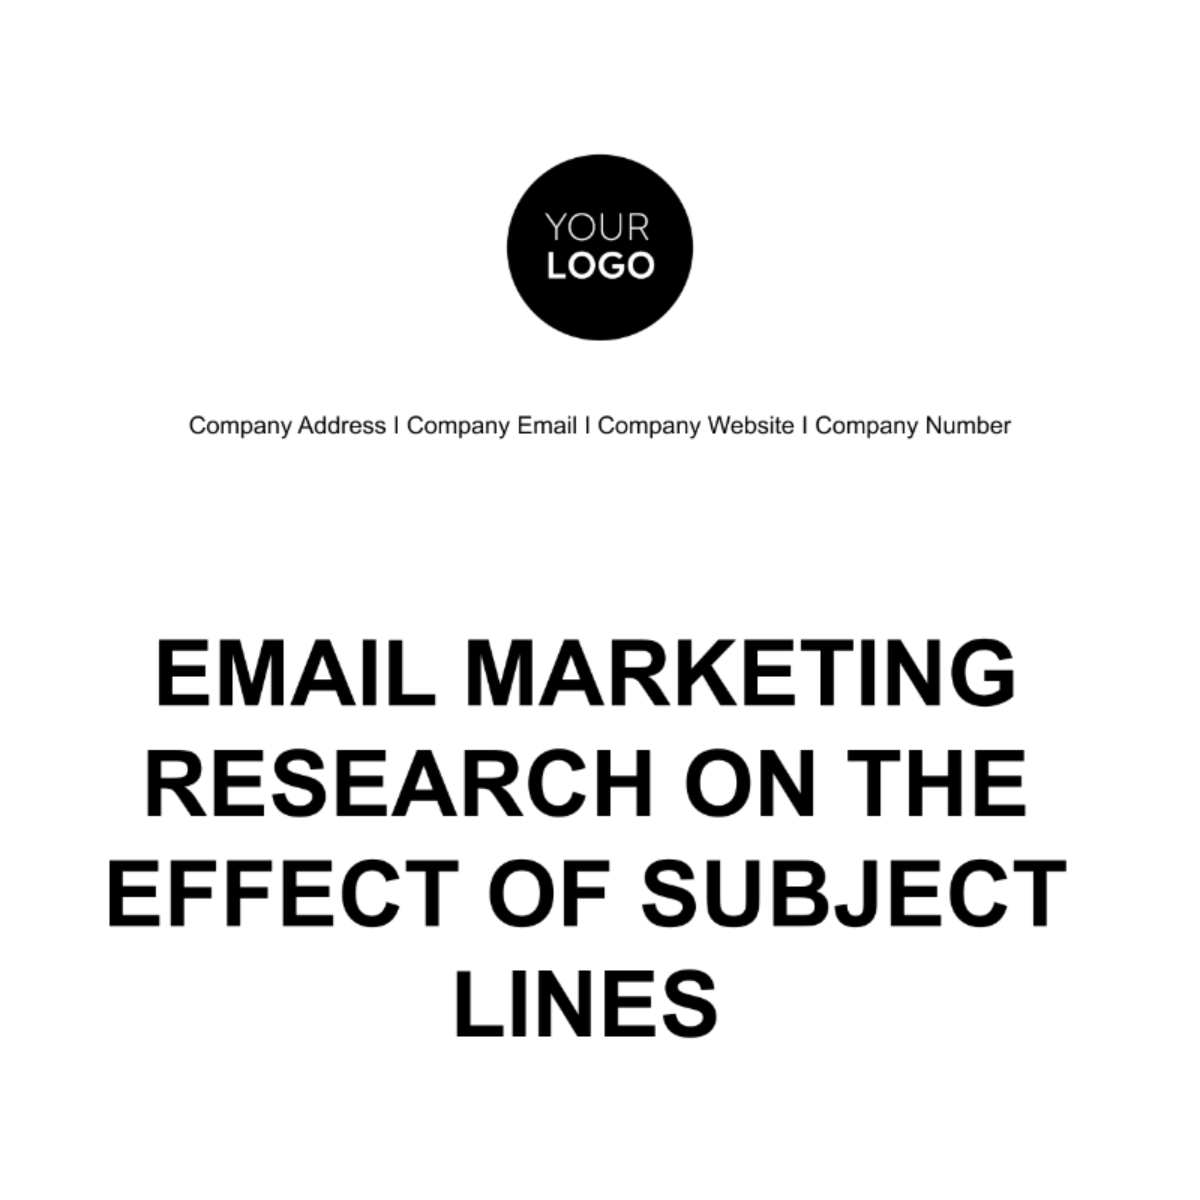 Email Marketing Research on the Effect of Subject Lines Template